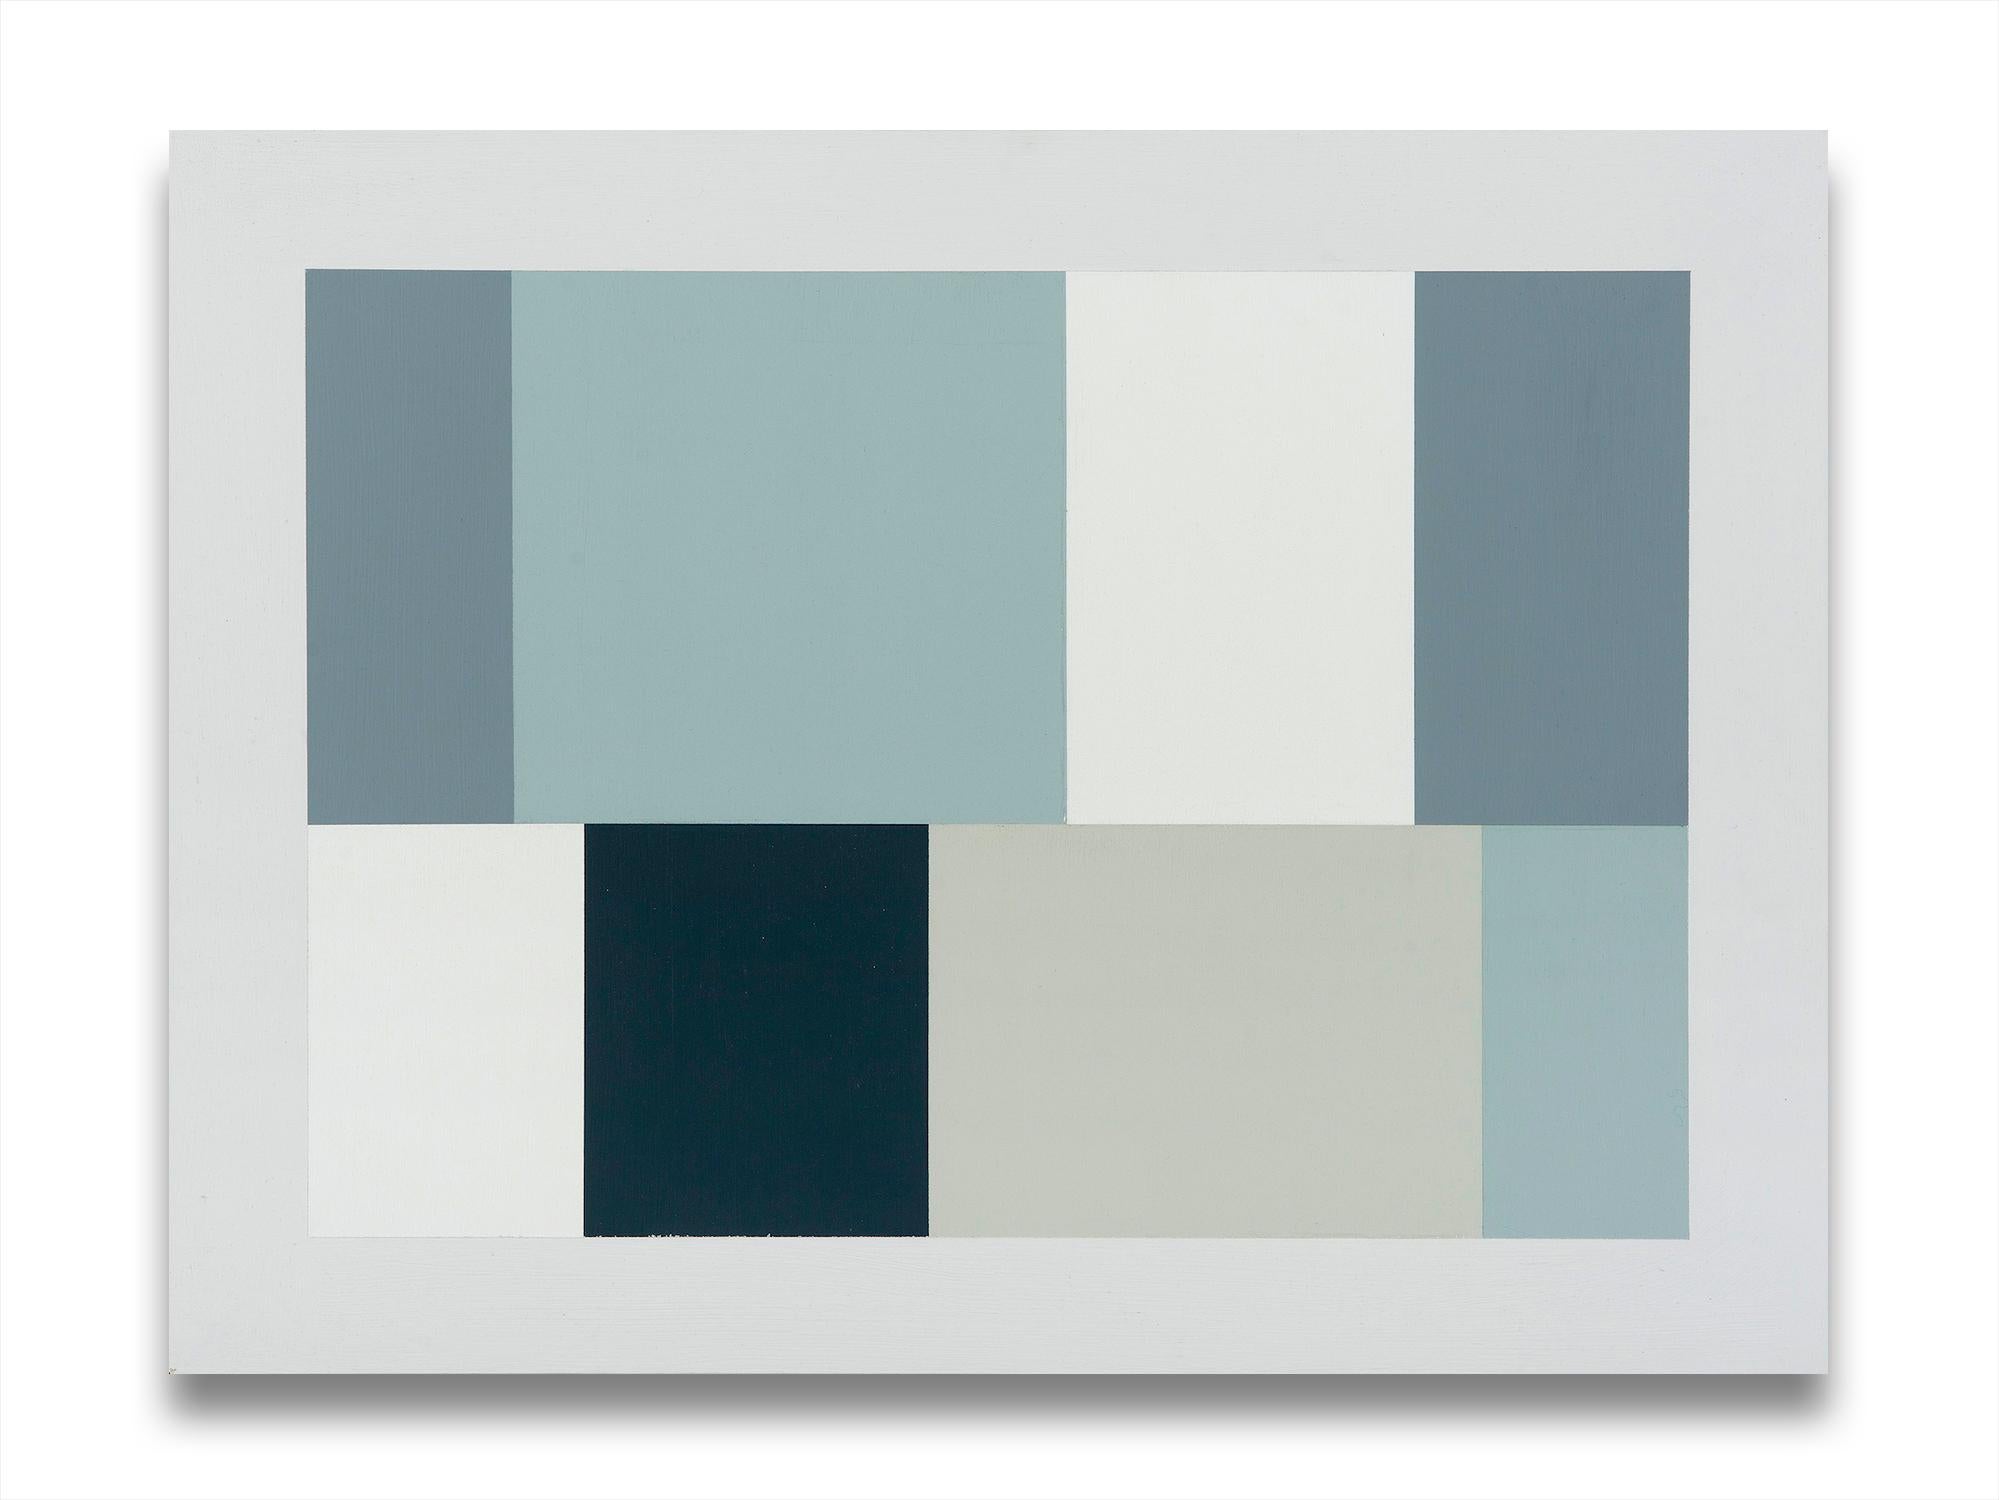 Grey Test Pattern 1 (Abstract Painting)

Acrylic/gouache on wood - Unframed

Test Pattern series sets up a generic template as a poetic prompt to consider how behavioural responses to color and form stimulate an abstract sense of contemporary